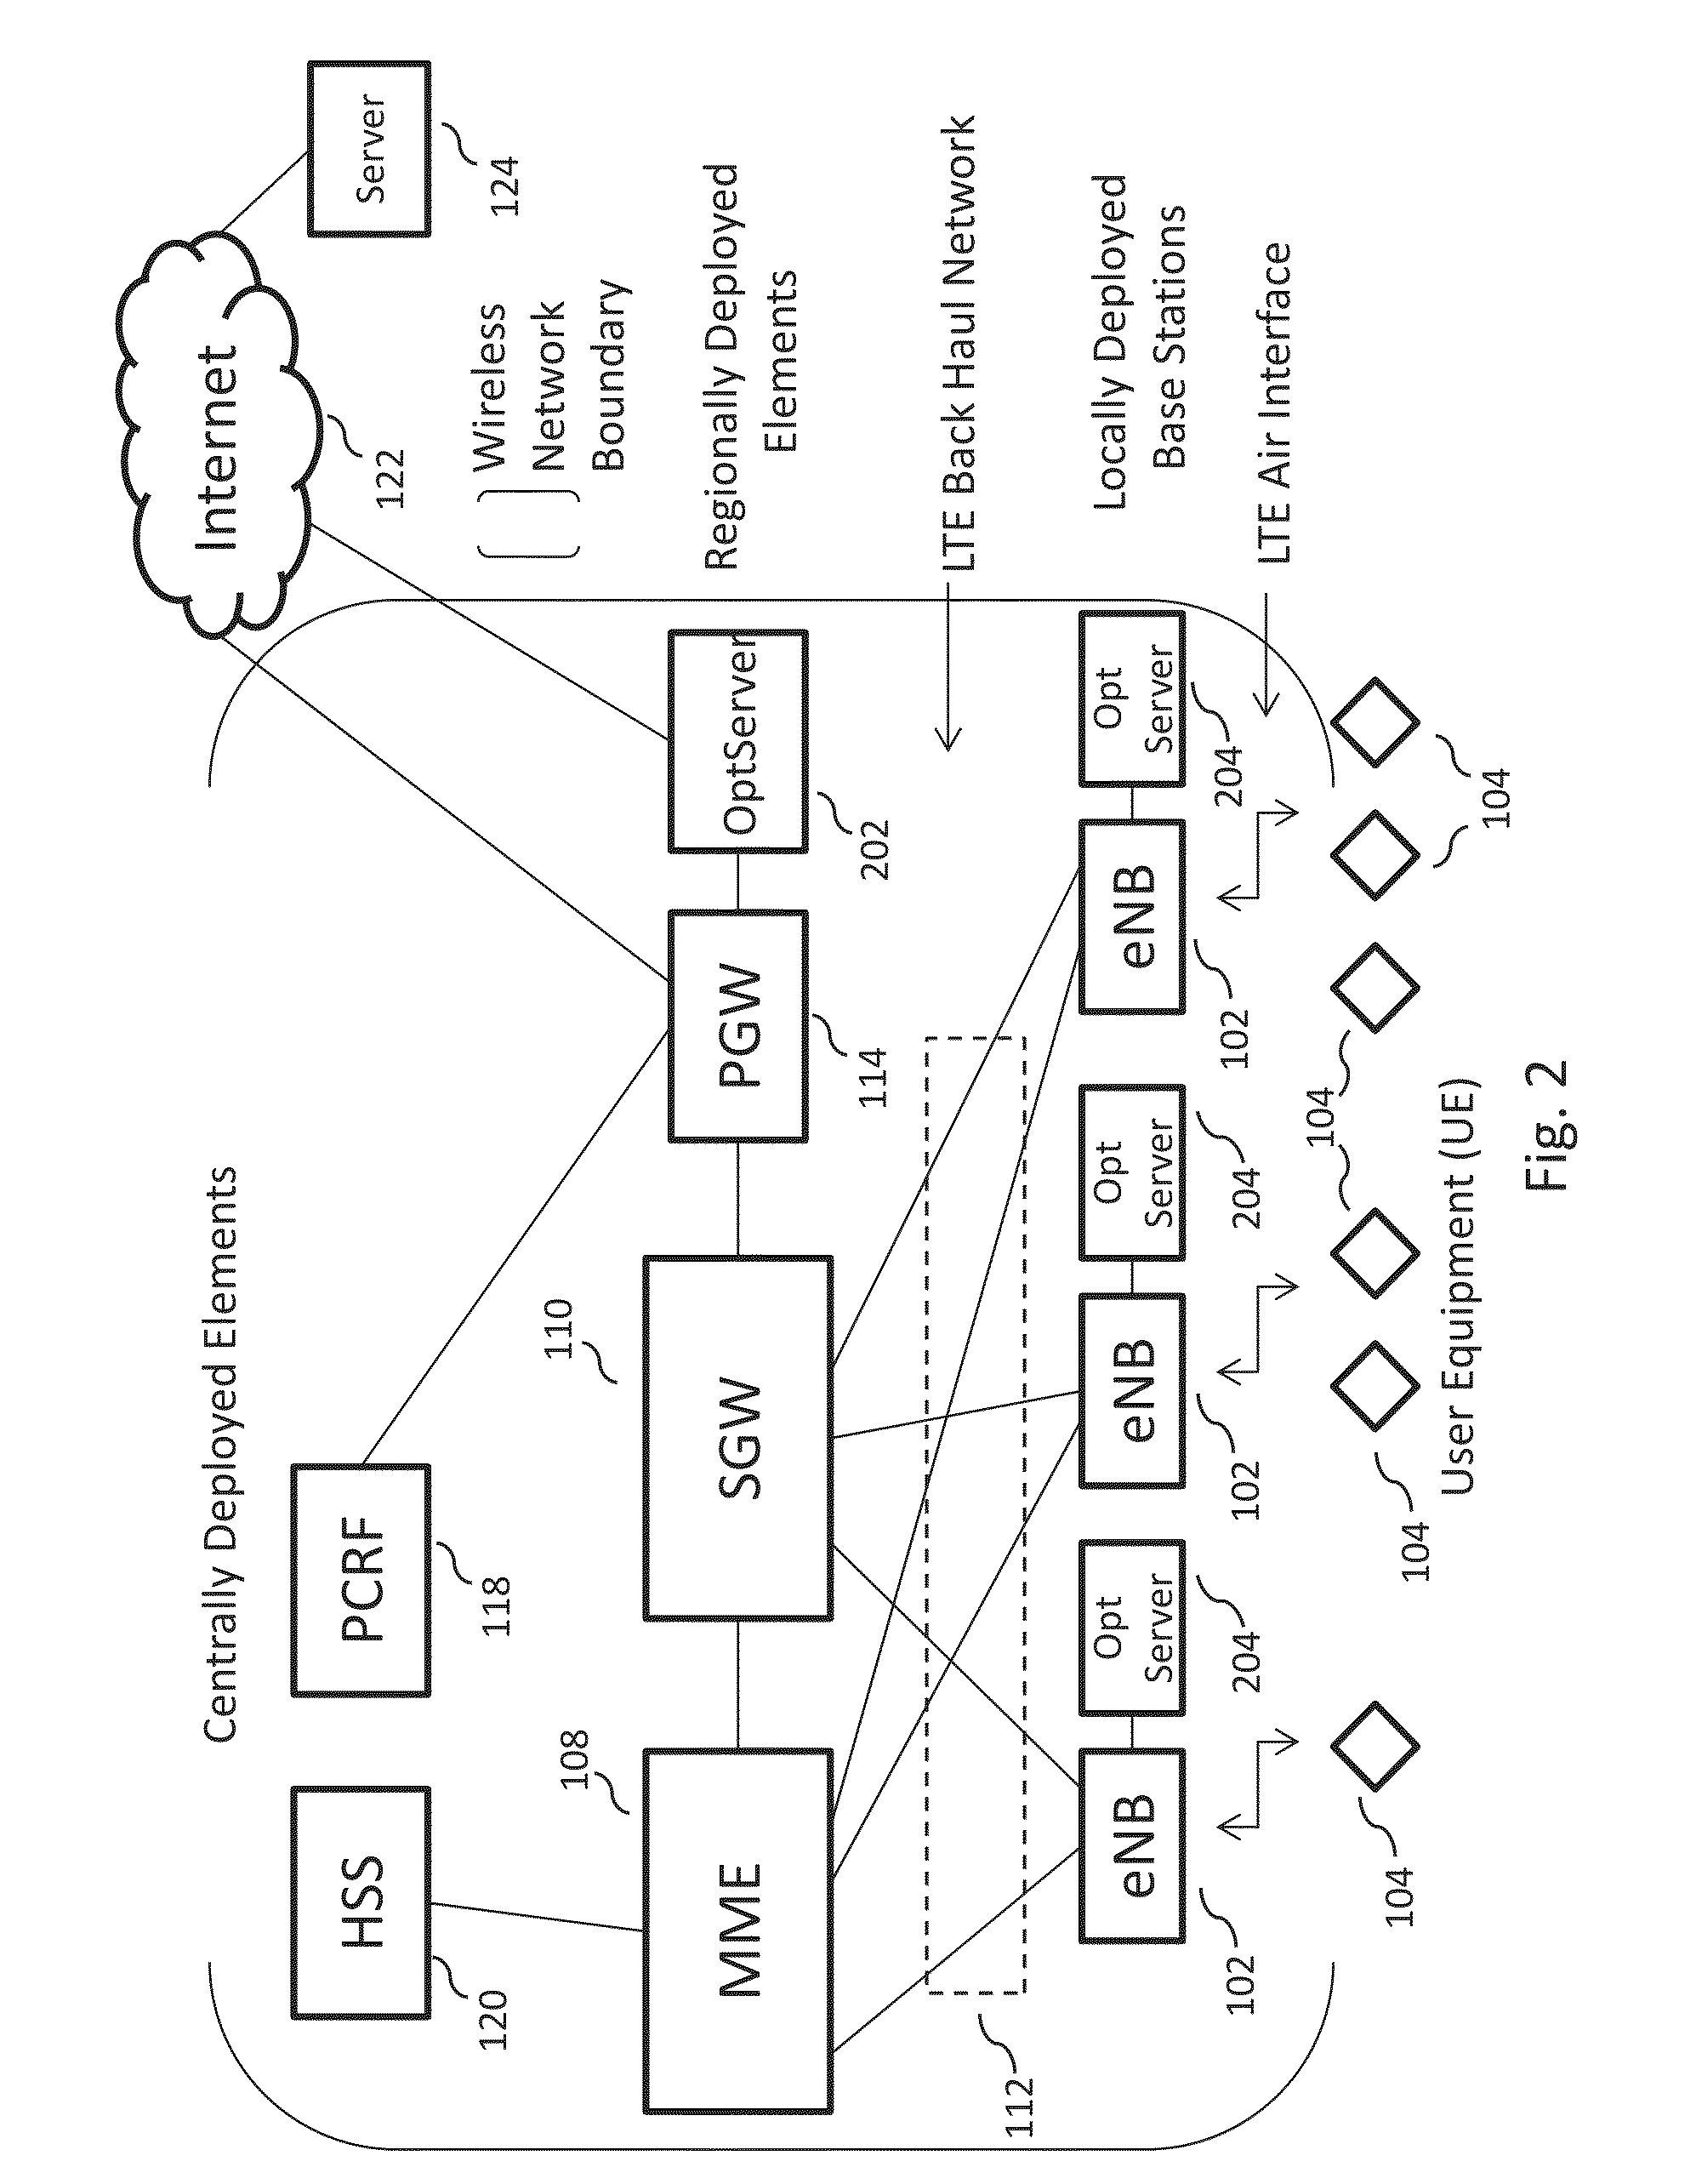 Wireless network based sensor data collection, processing, storage, and distribution